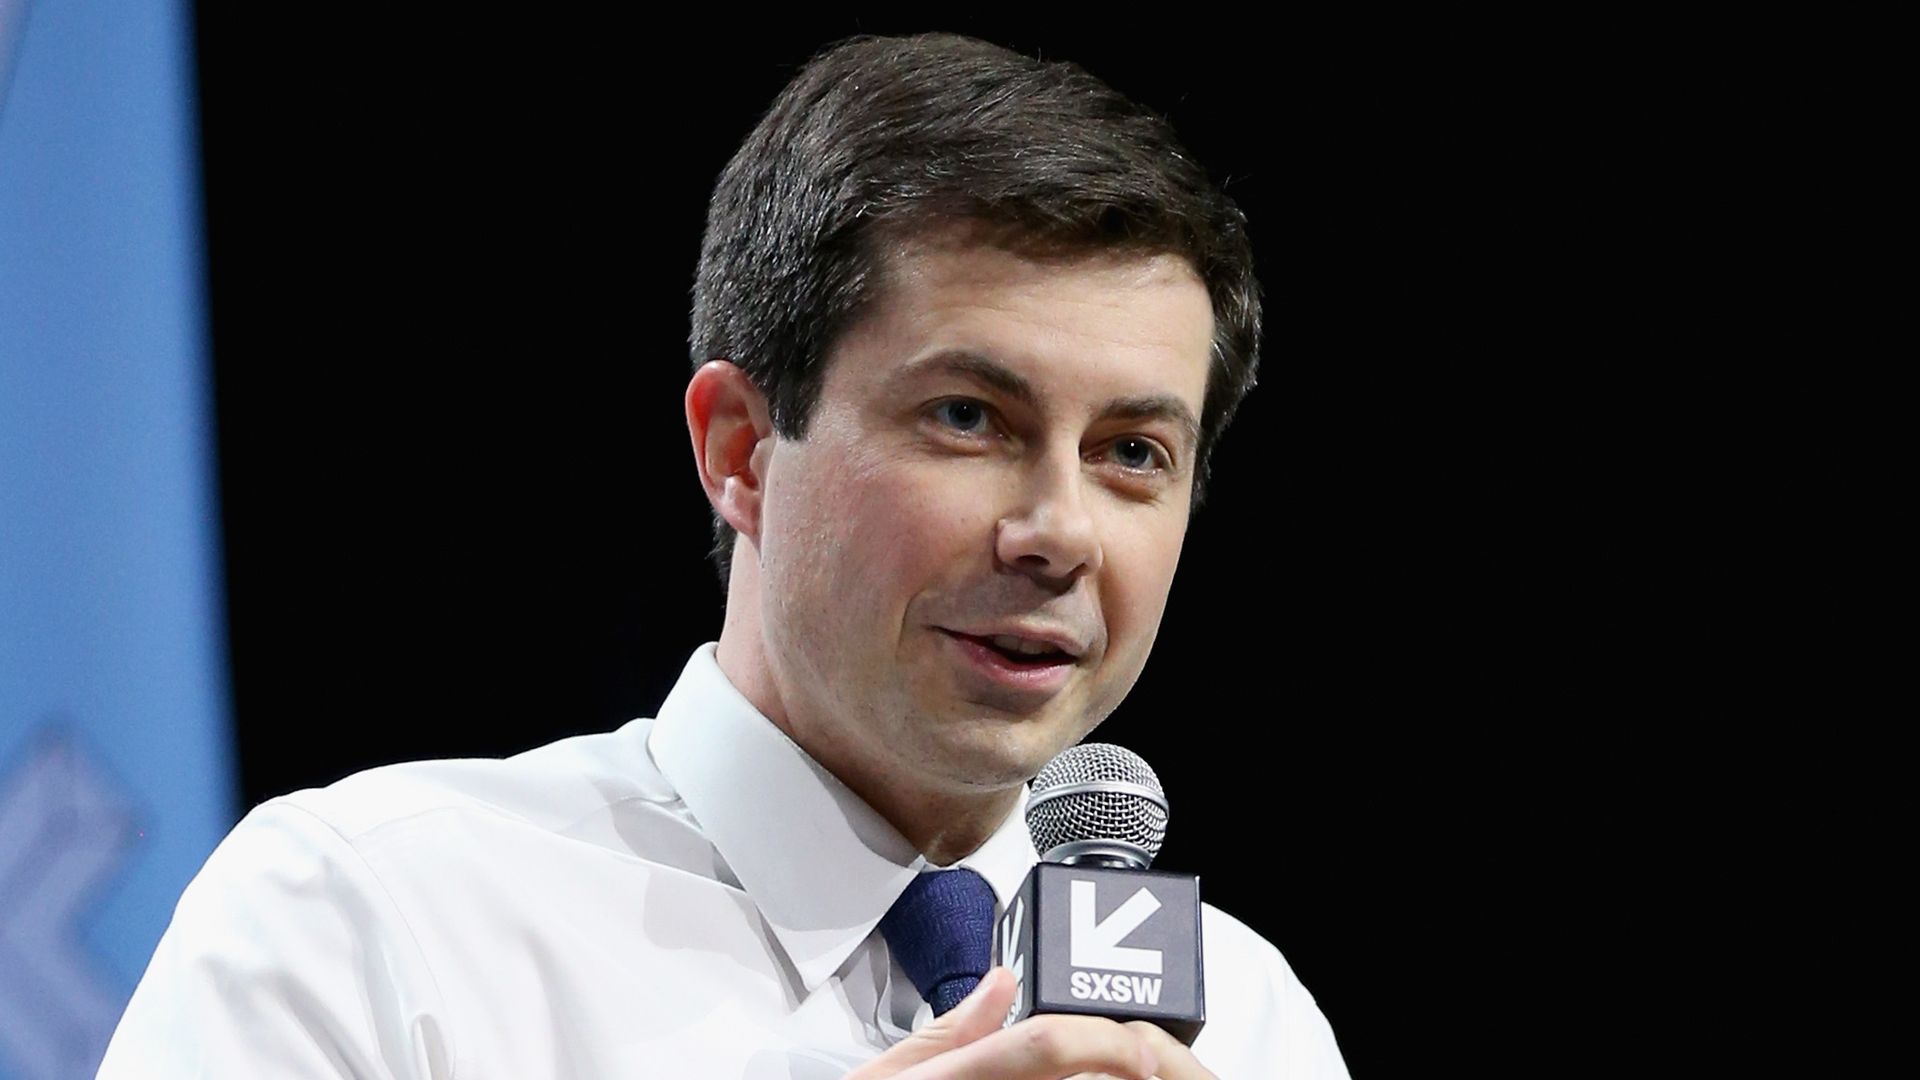 Pete Buttigieg says he's always disagreed ferociously with Vice President Mike Pence.